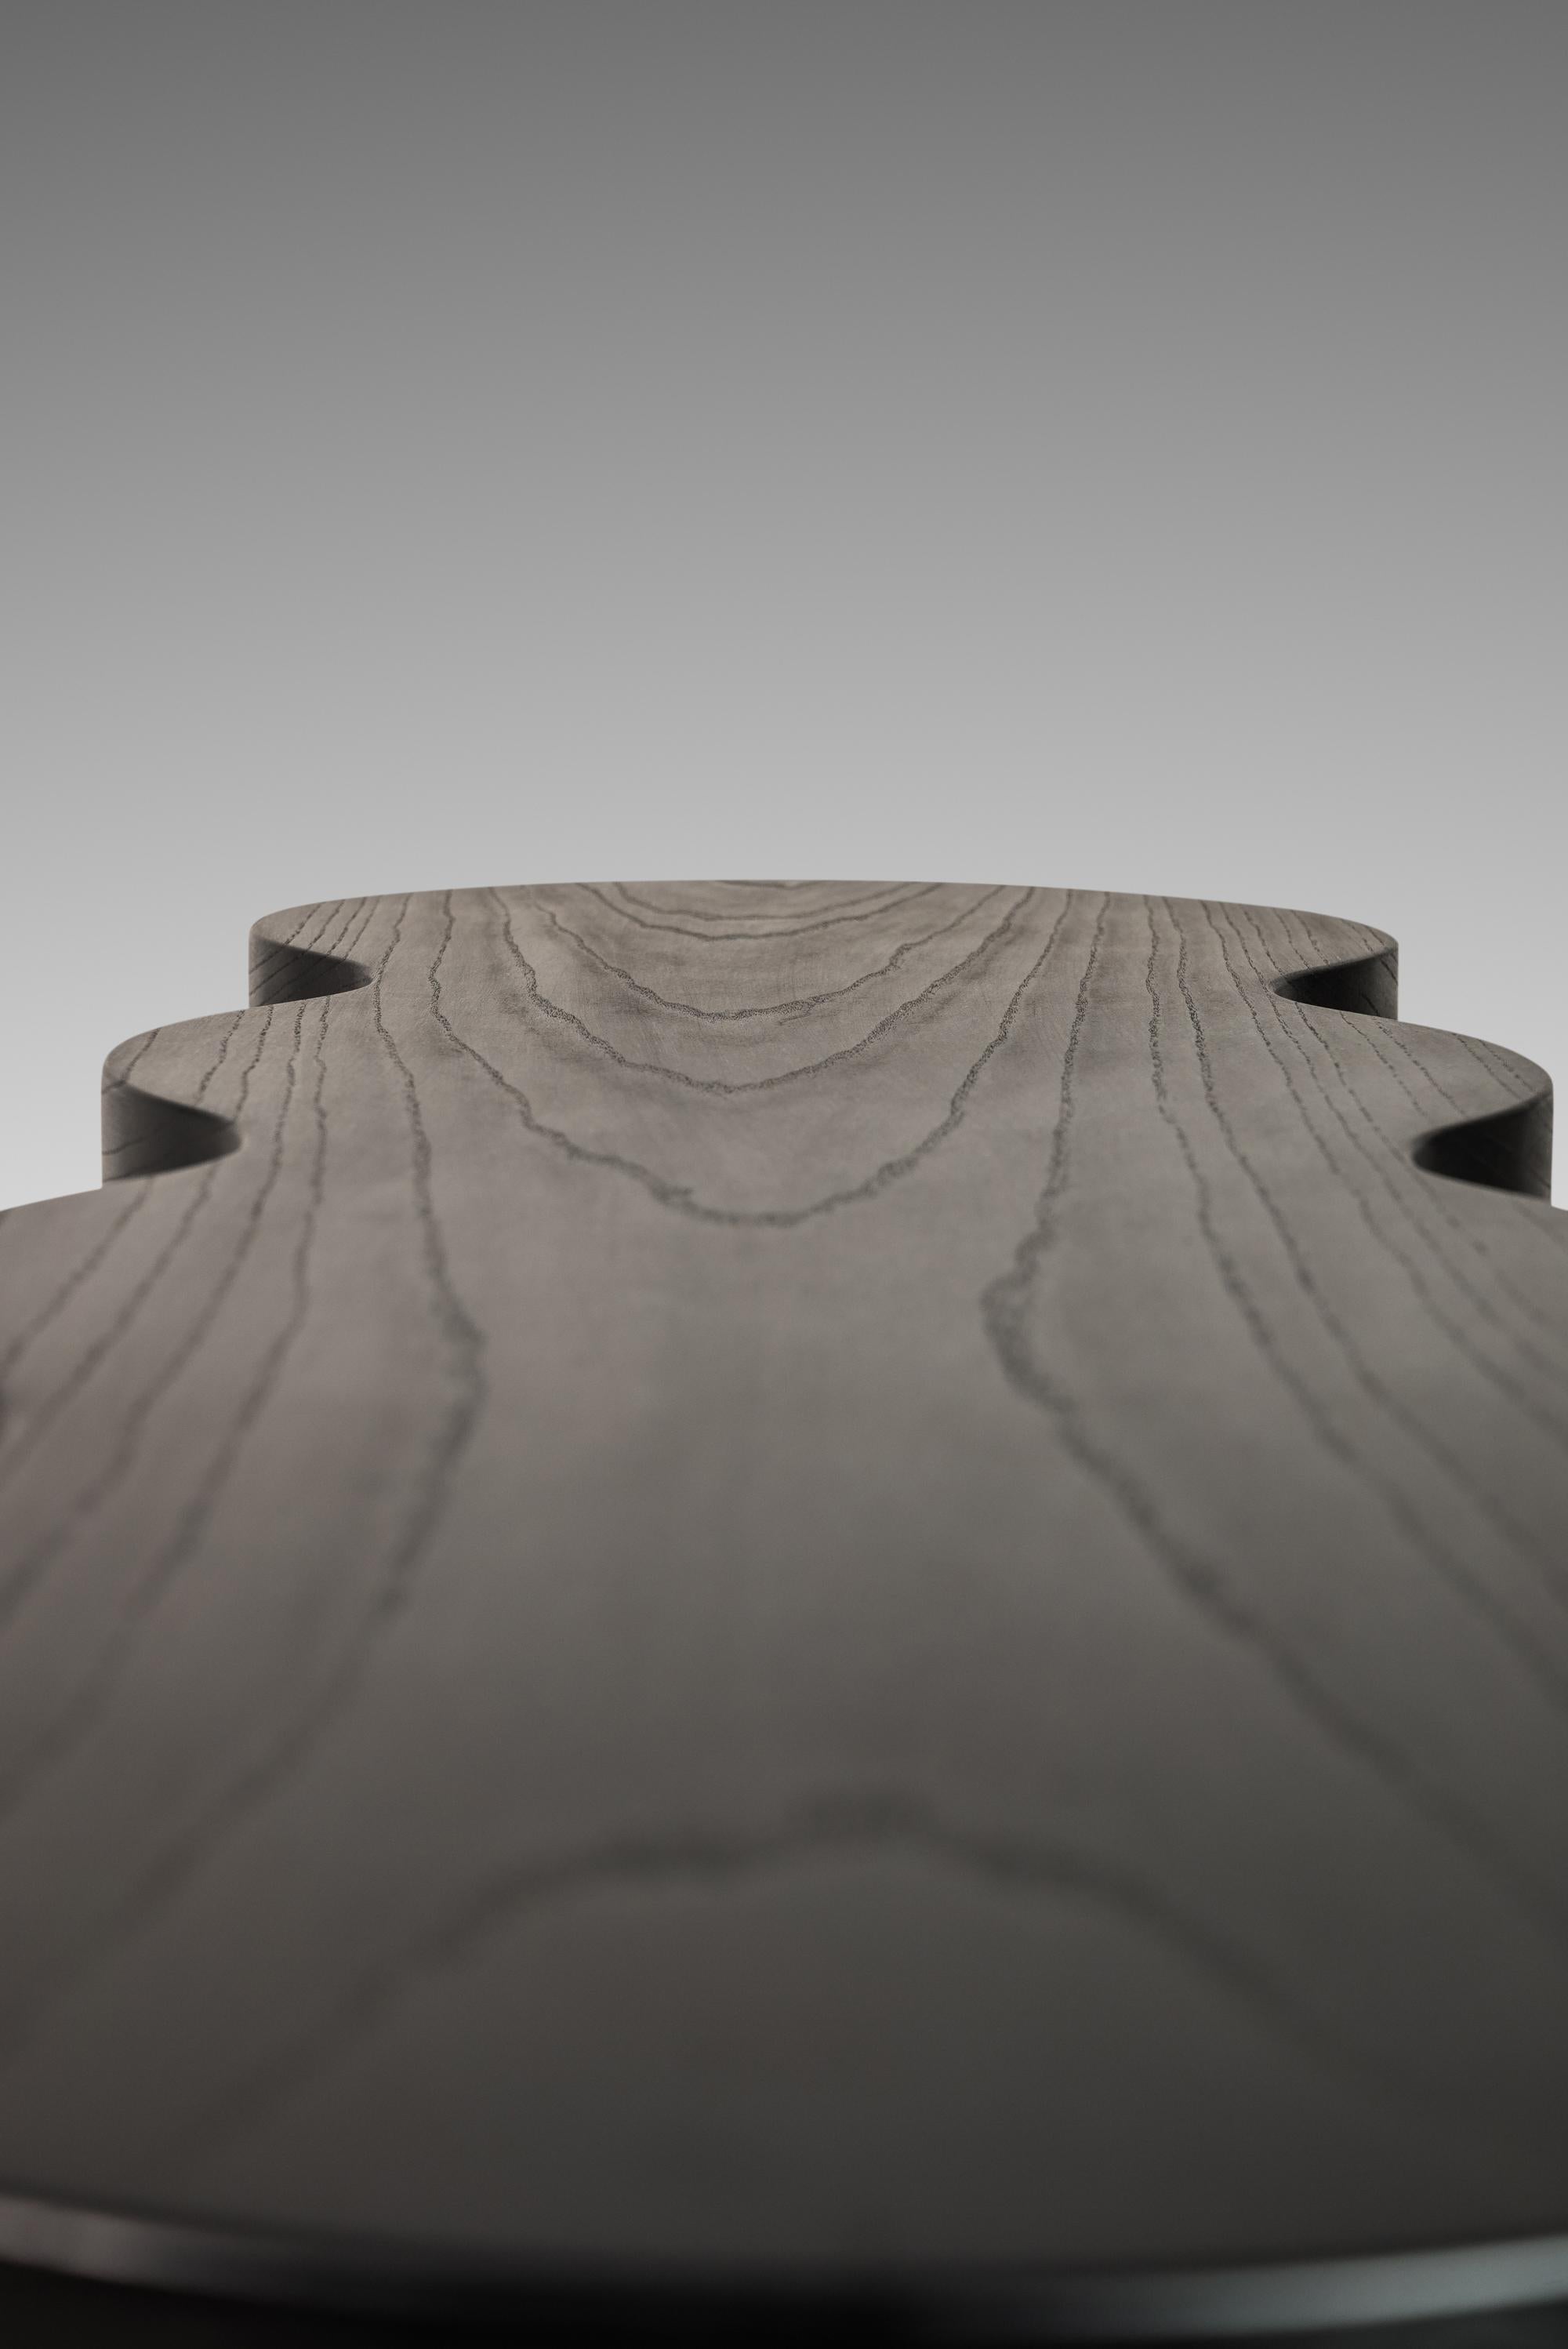 Hand-Turned Sculptural Bench in Solid Ebonized Ash by Mark Leblanc, c. 2000s For Sale 2